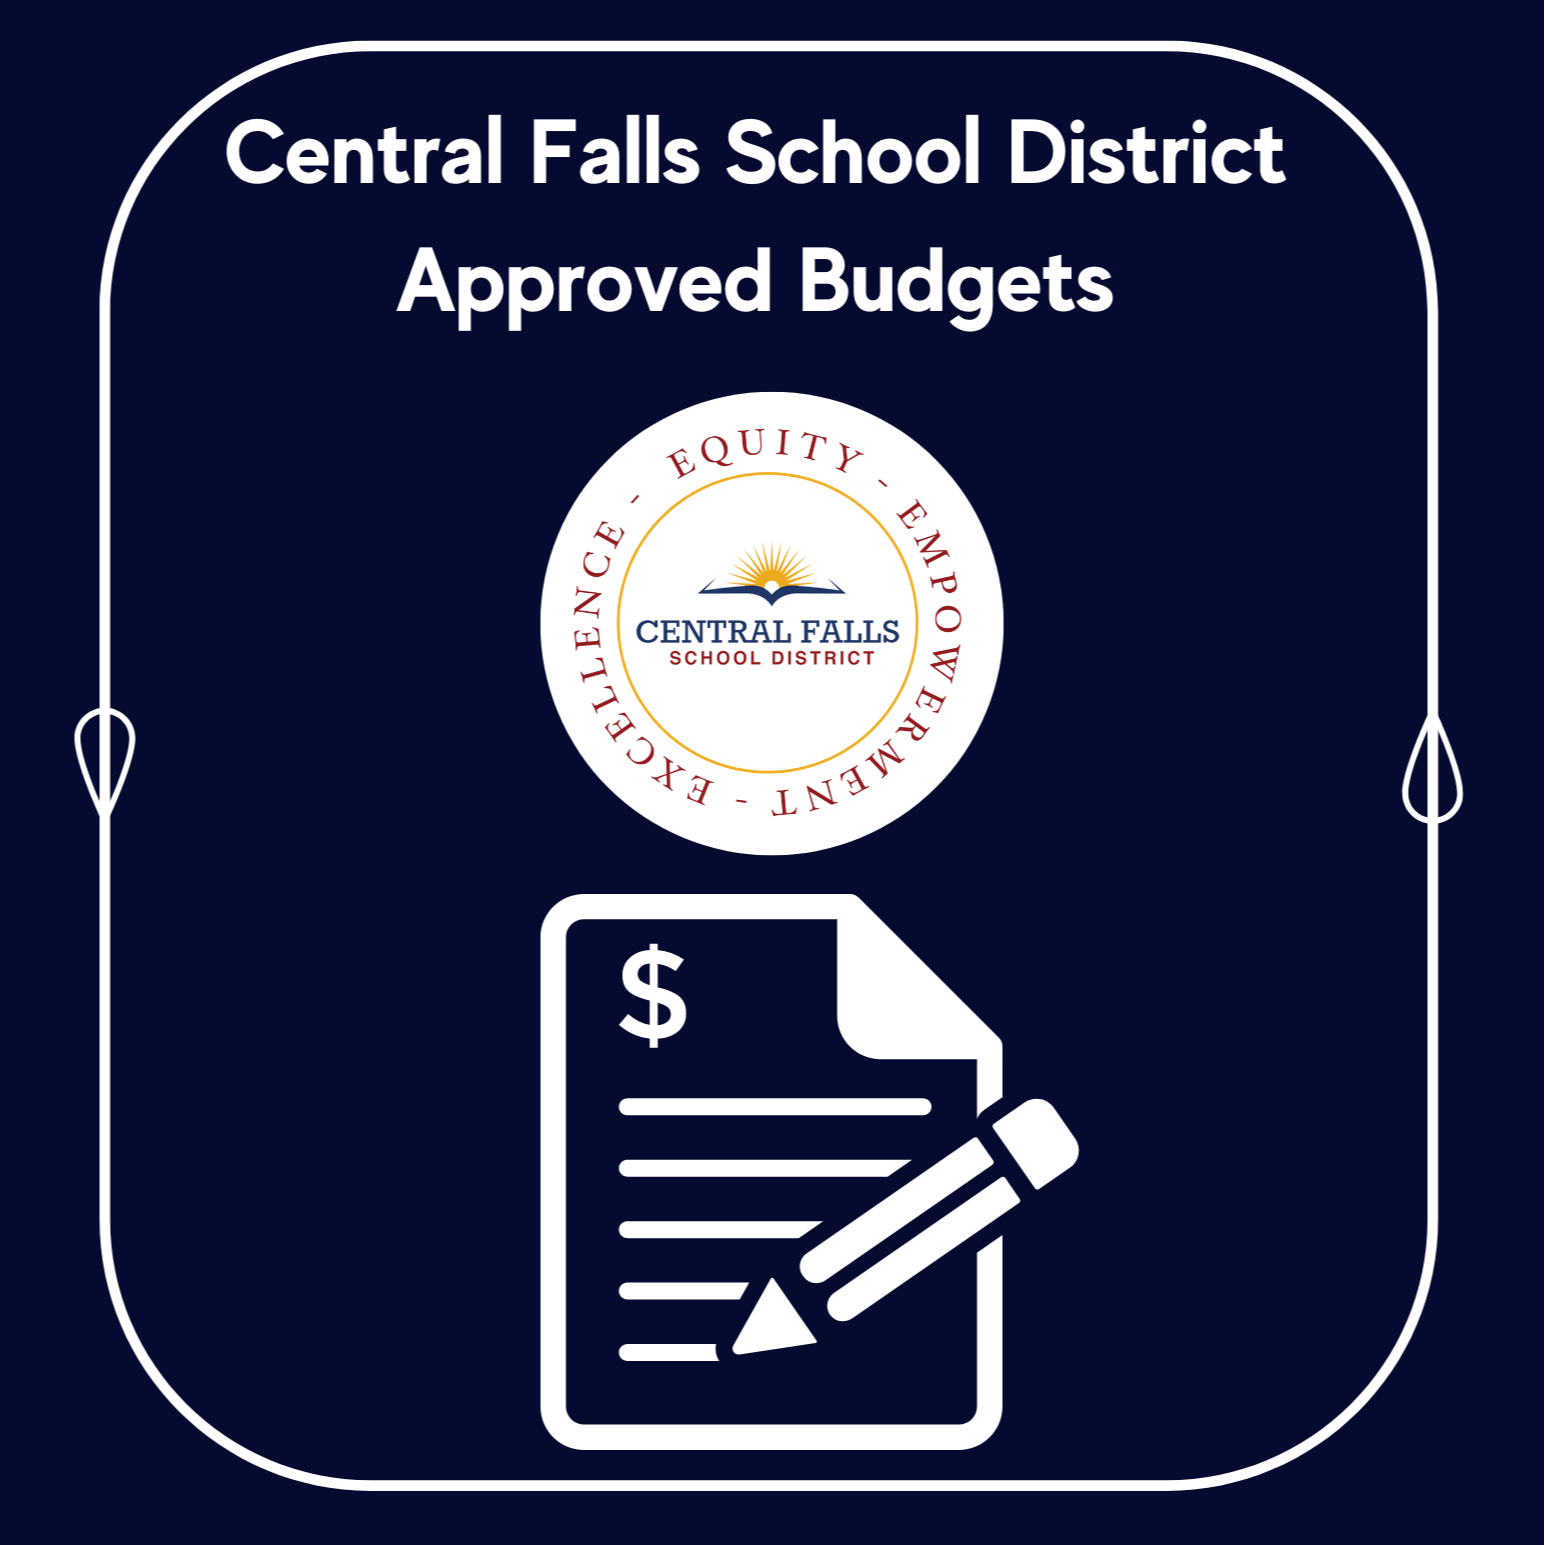 Central Falls School District Approved Budgets 